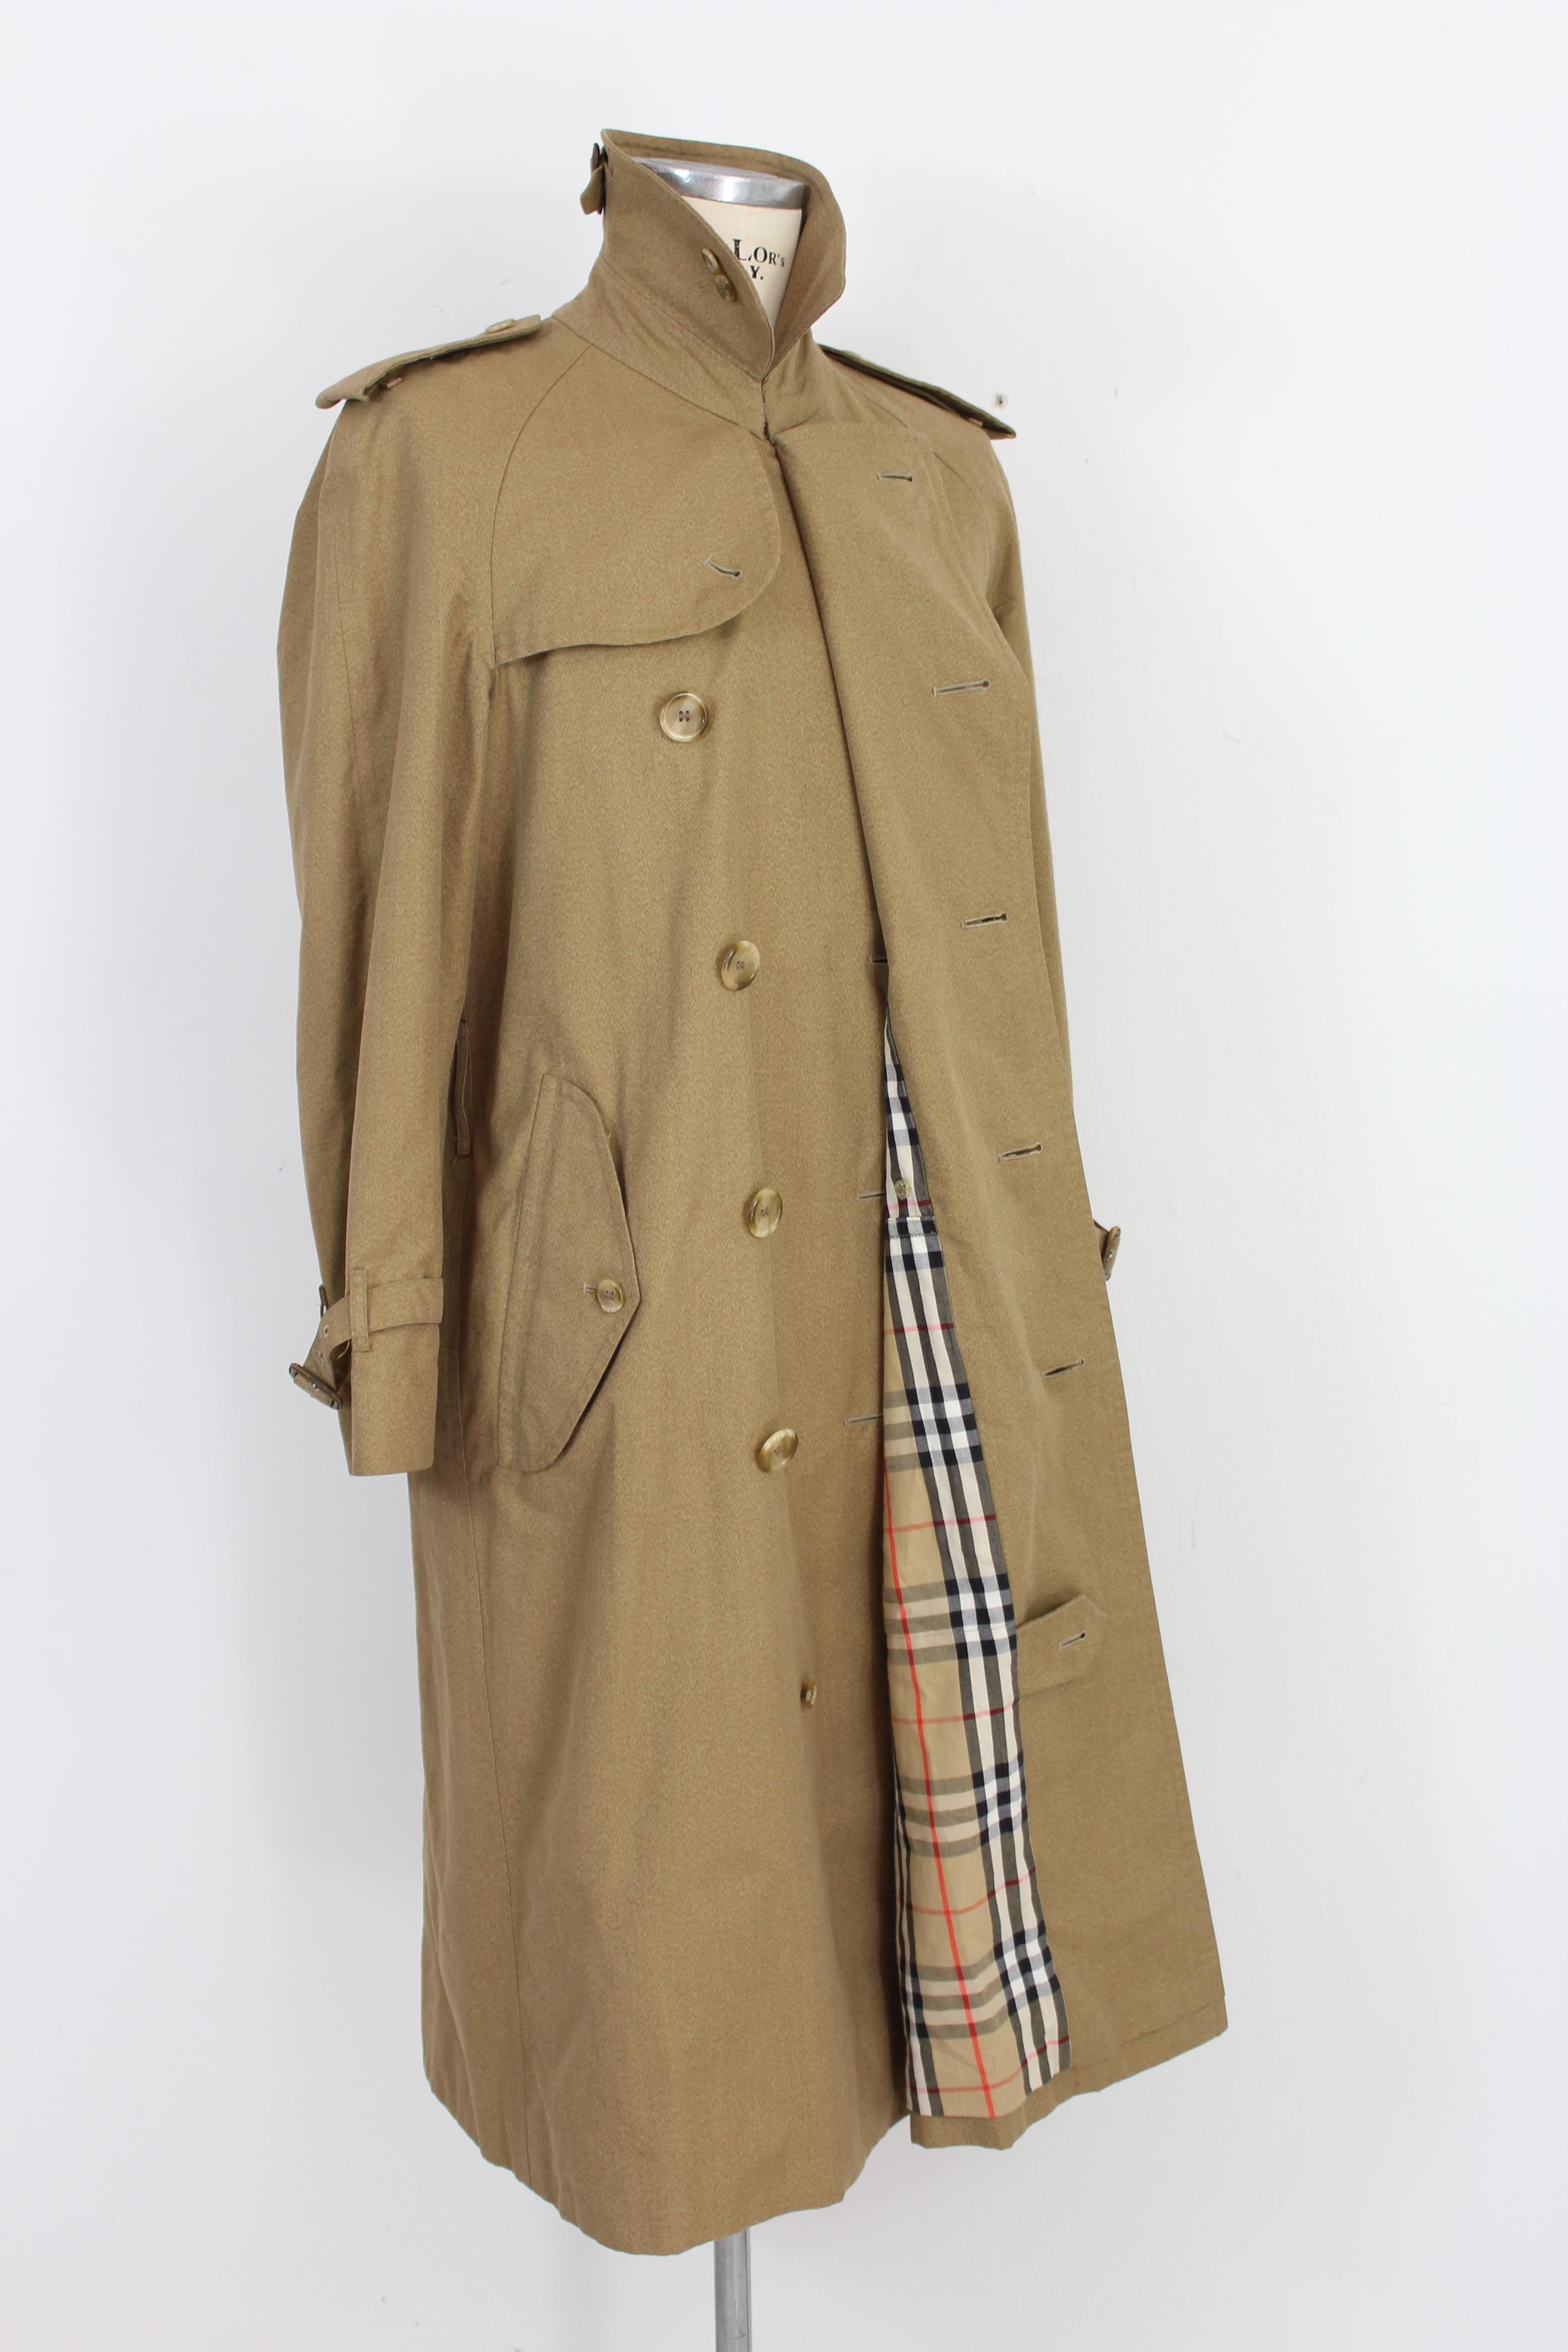 Burberry Beige Cotton Double Breasted Trench Coat 1980s 3